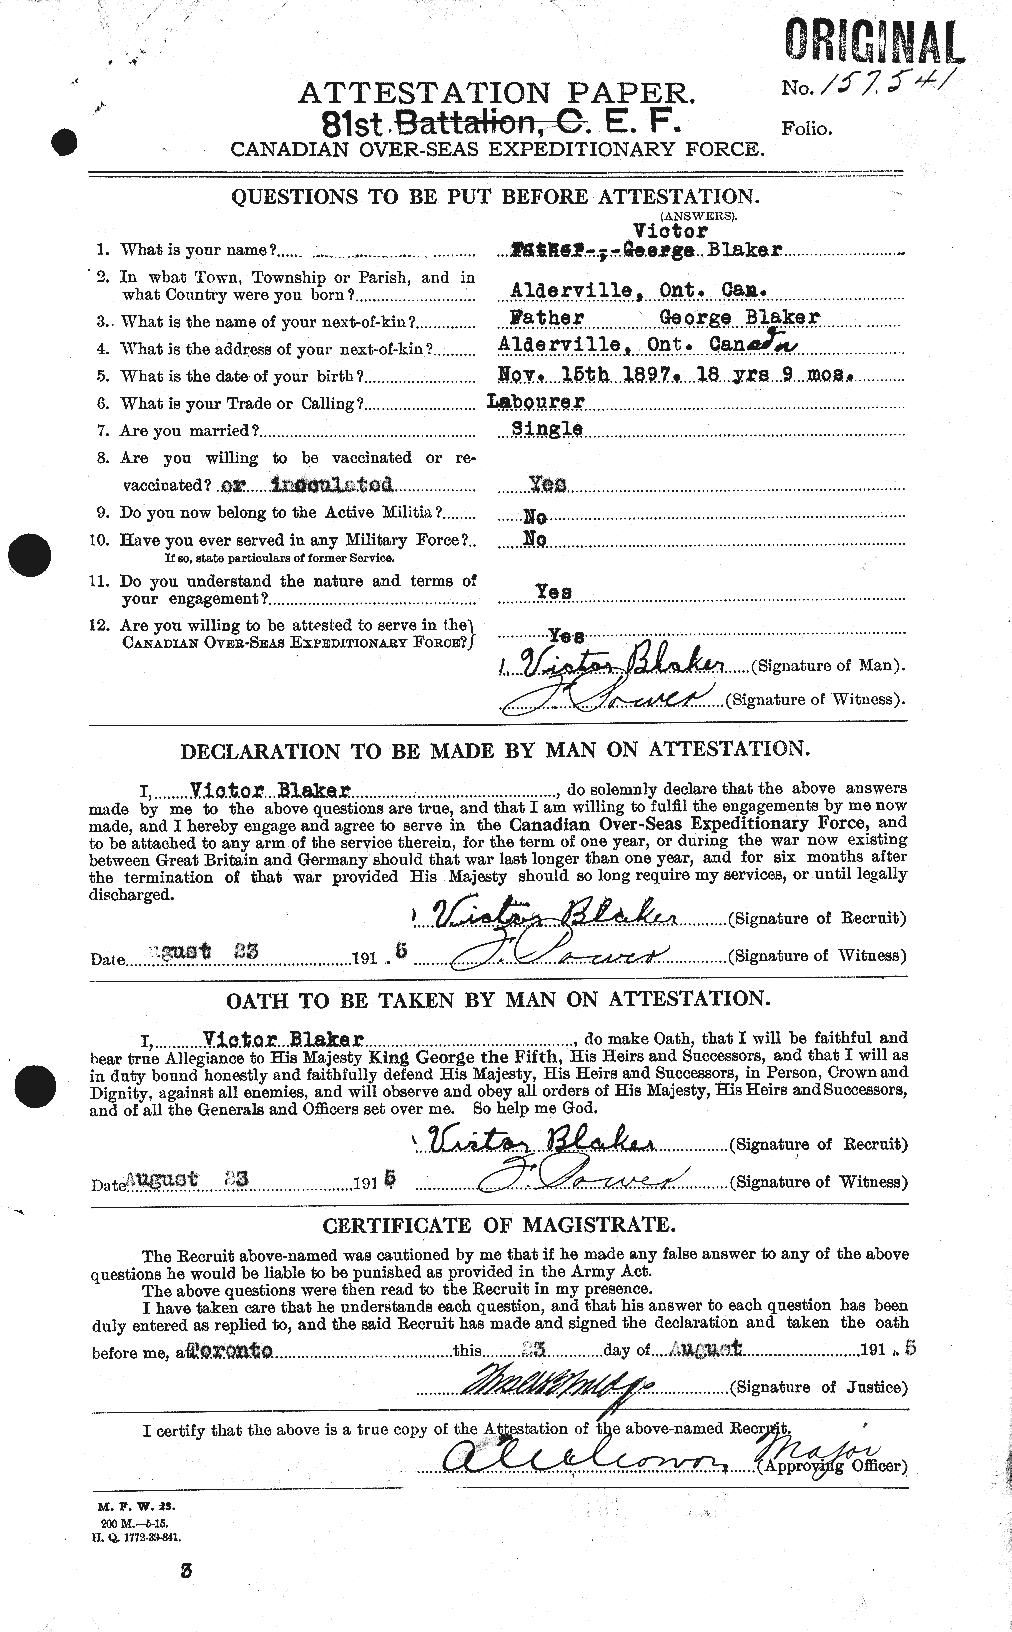 Personnel Records of the First World War - CEF 246737a